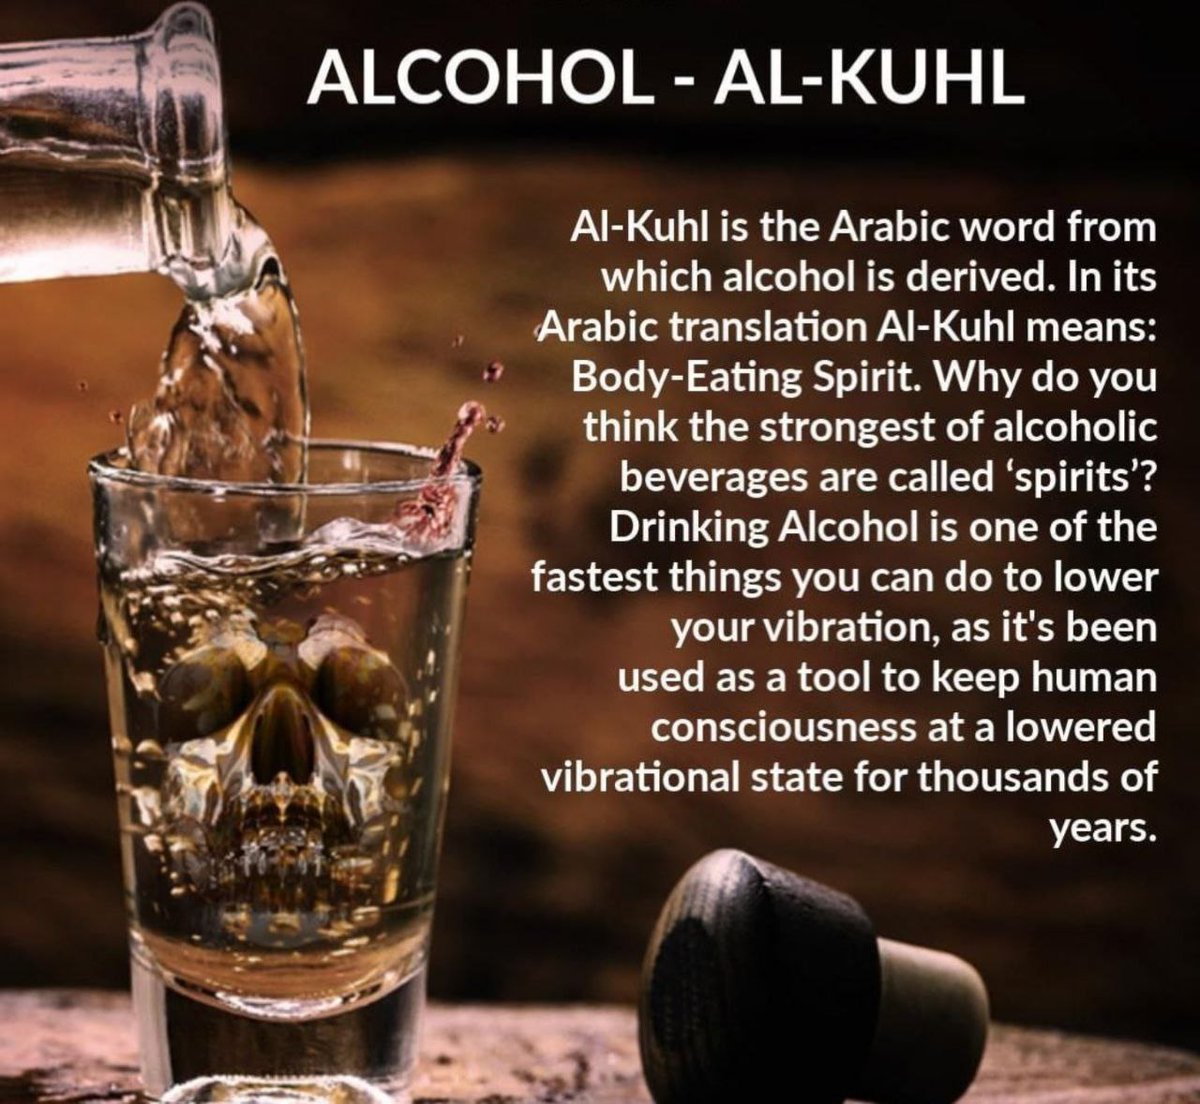 Rethink

Alcohol also ages you rapidly !